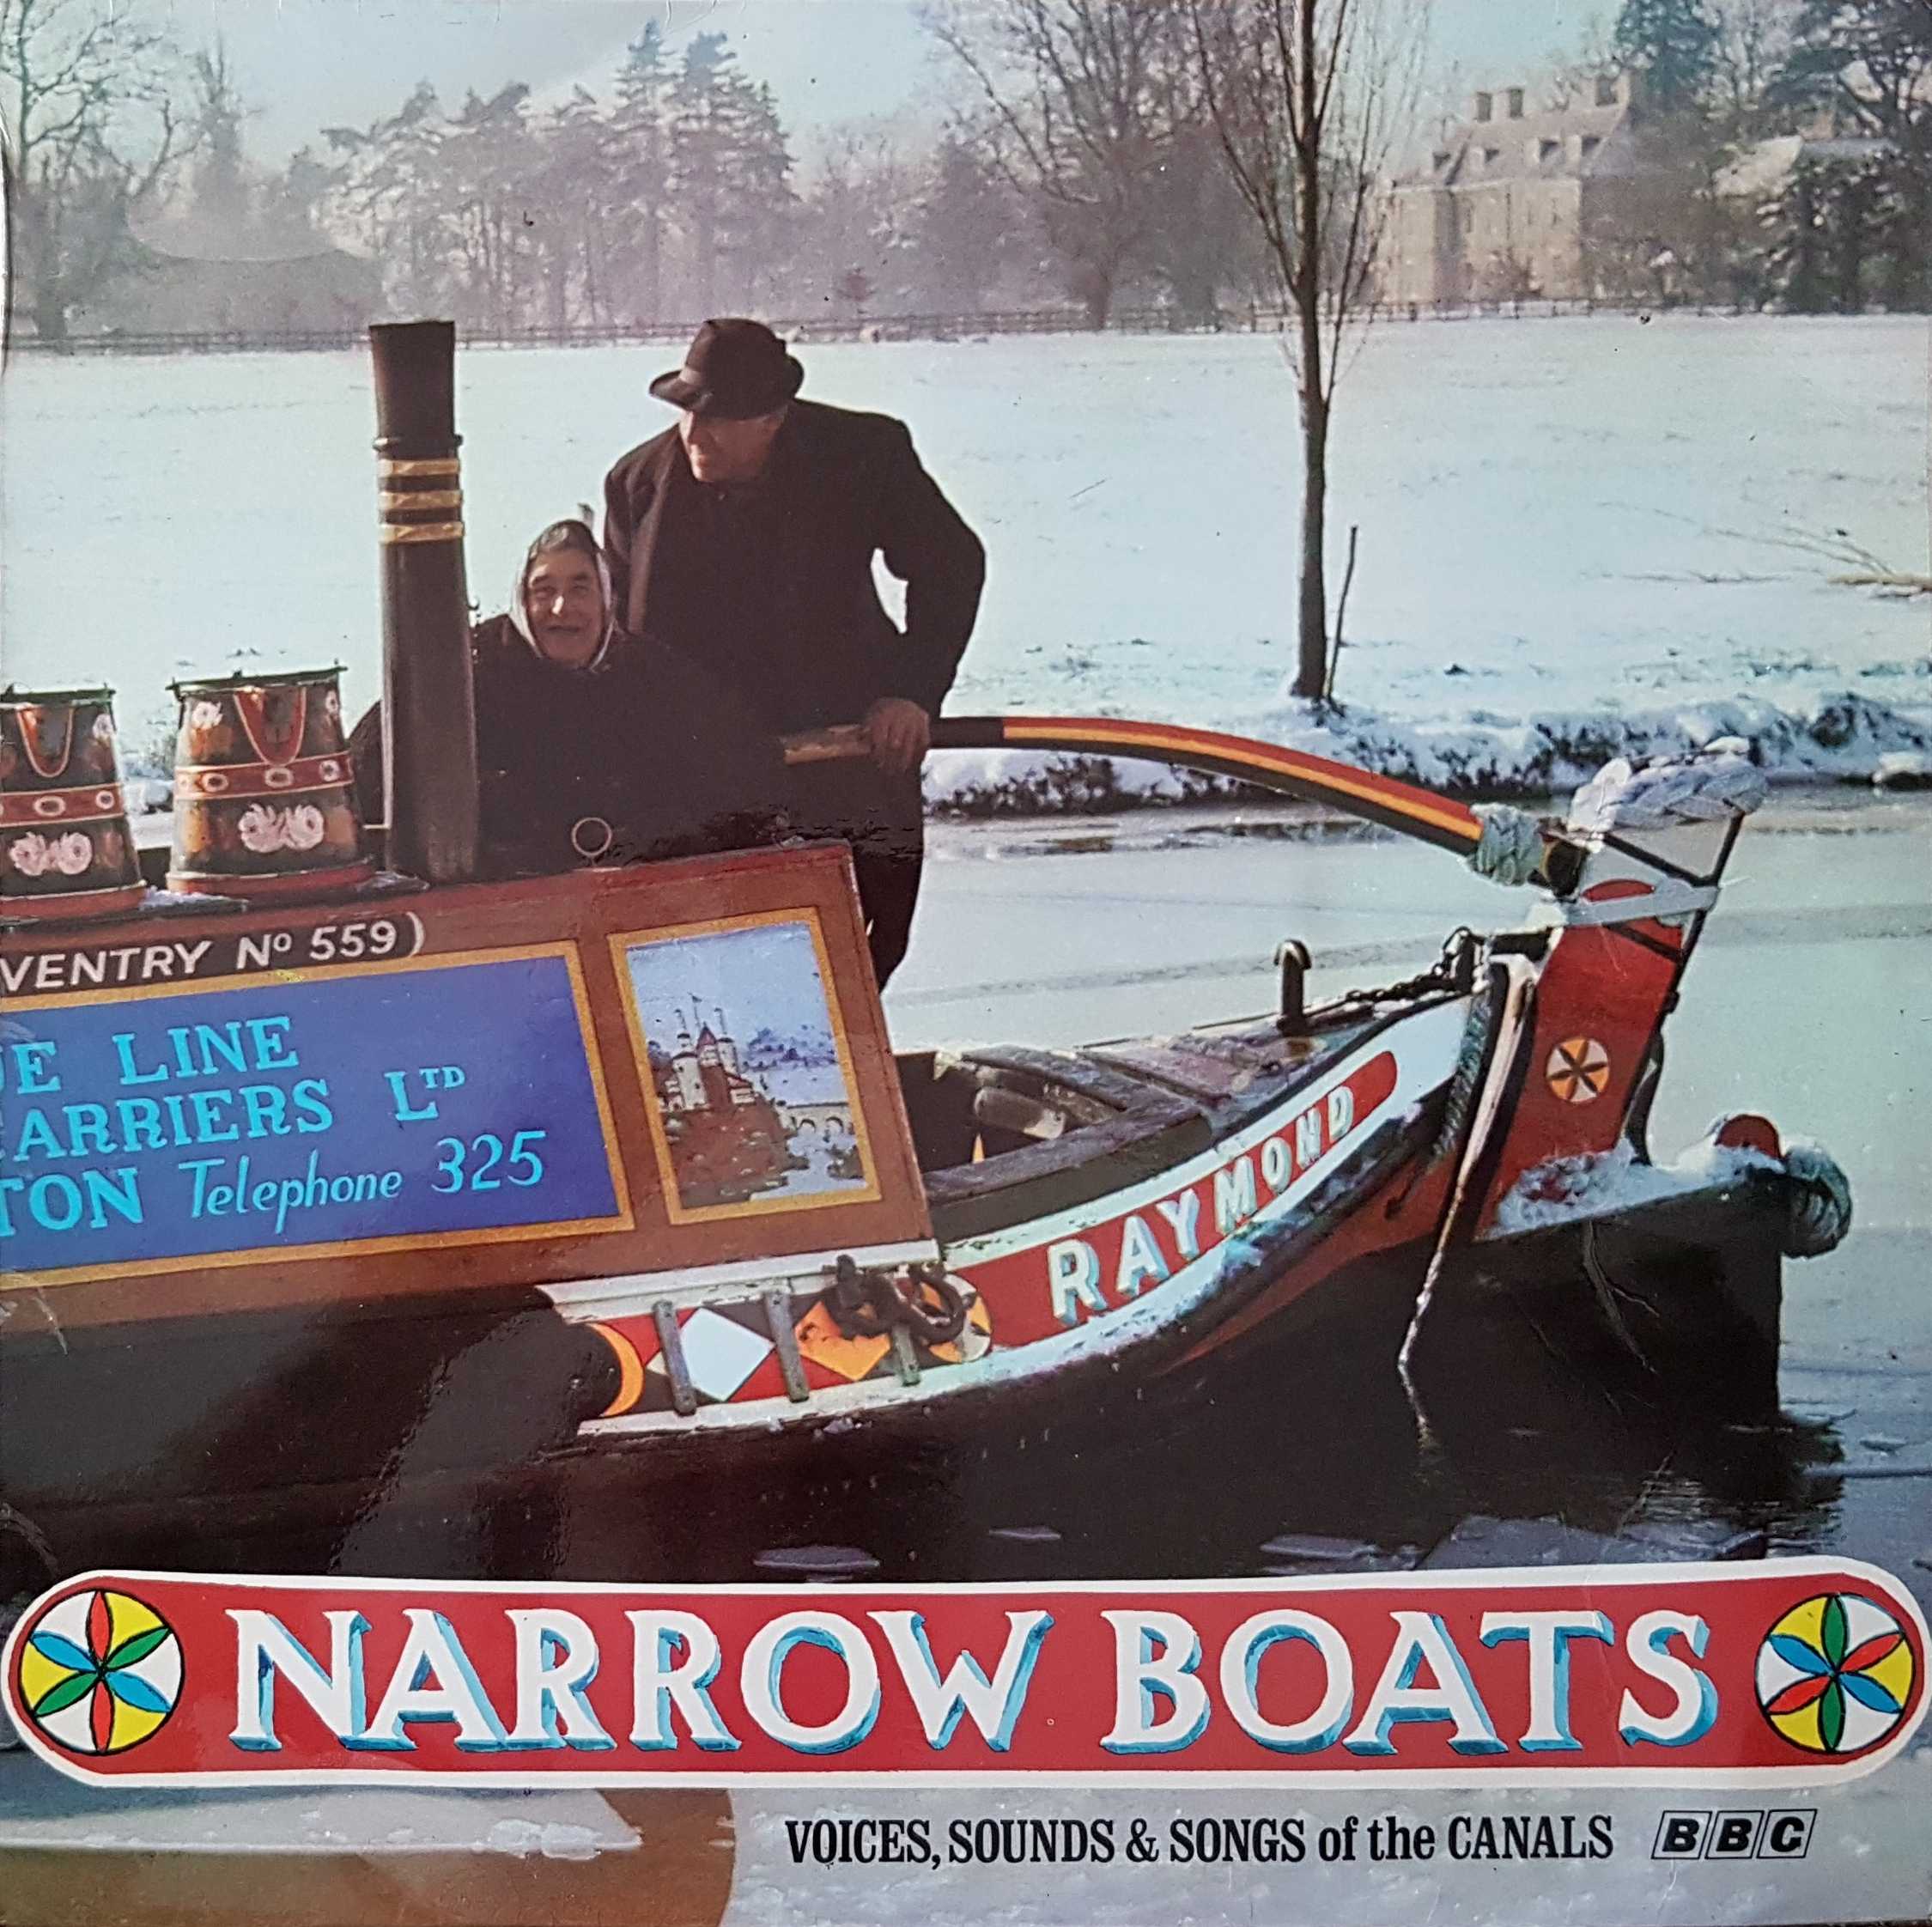 Picture of REB 56 Narrow boats by artist Various from the BBC albums - Records and Tapes library